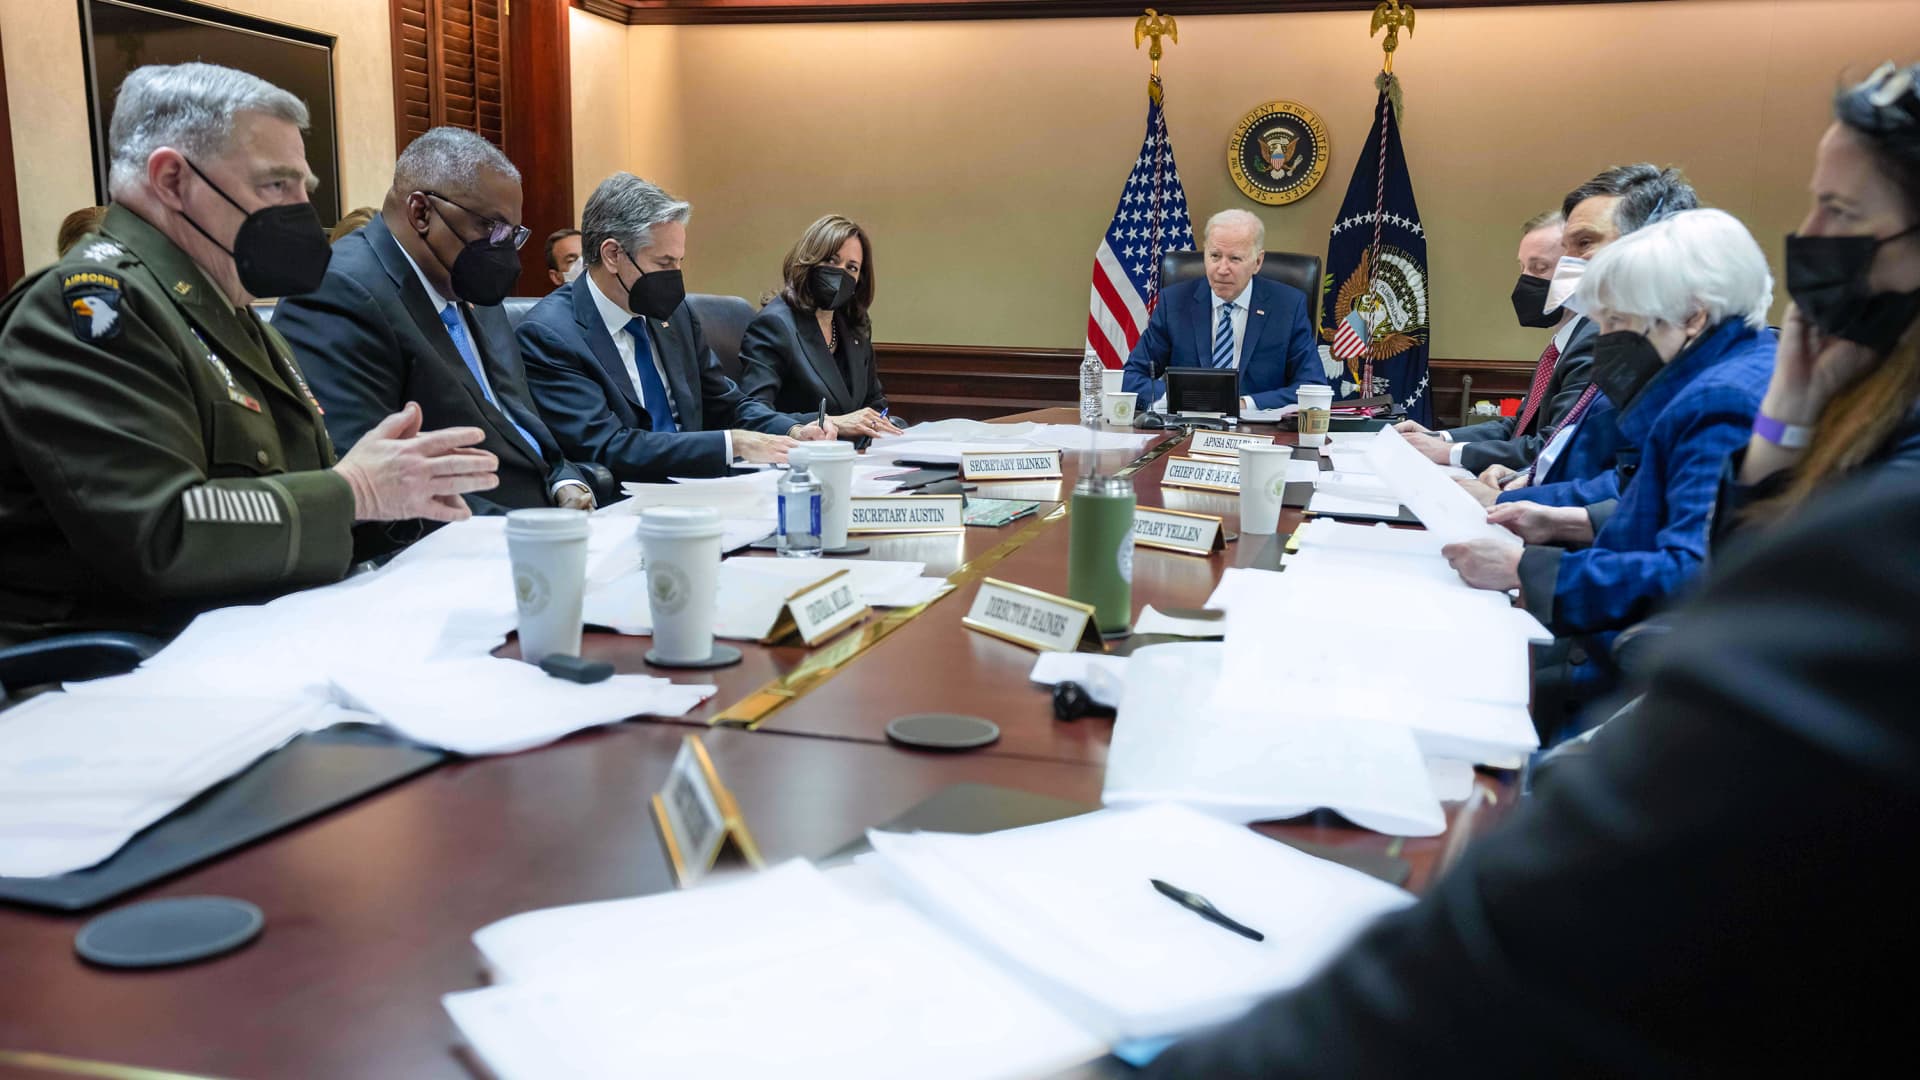 Earlier this morning, President Biden convened a meeting of the National Security Council in the White House Situation Room to discuss the unprovoked and unjustified attack on Ukraine.